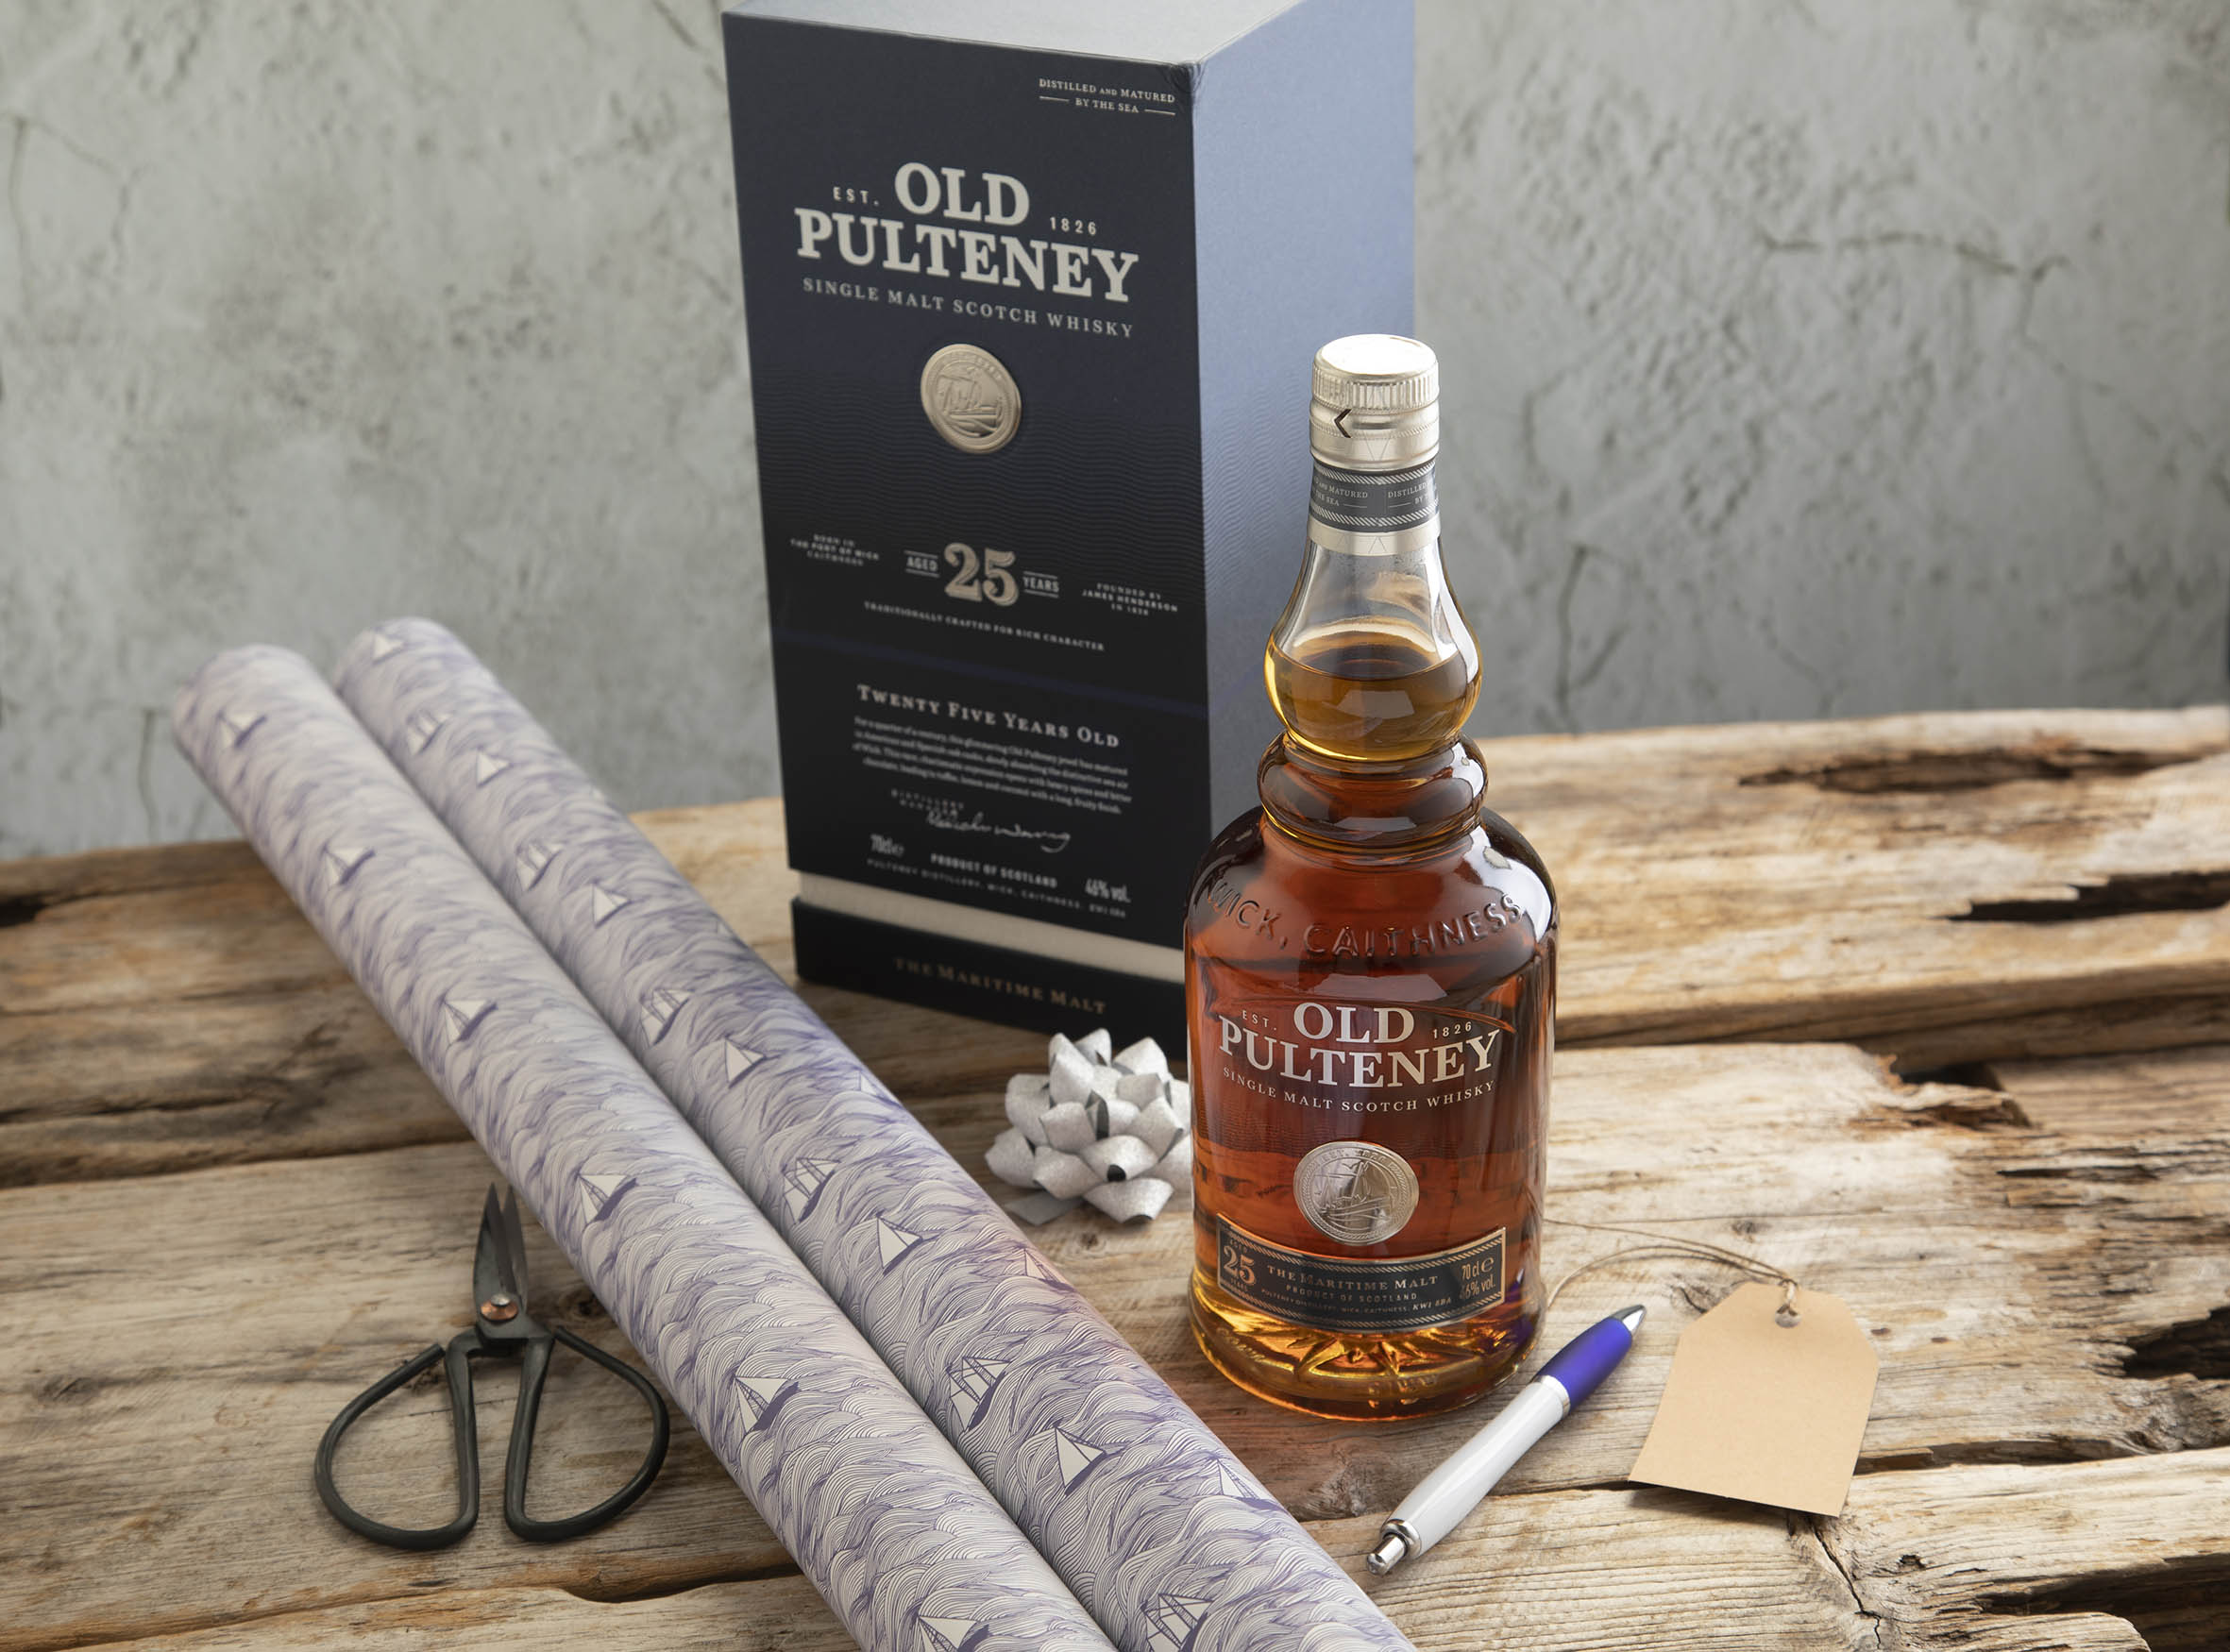 https://oldpulteney.com/wp-content/uploads/2022/08/Old-Pulteney-25-Gifting.jpg